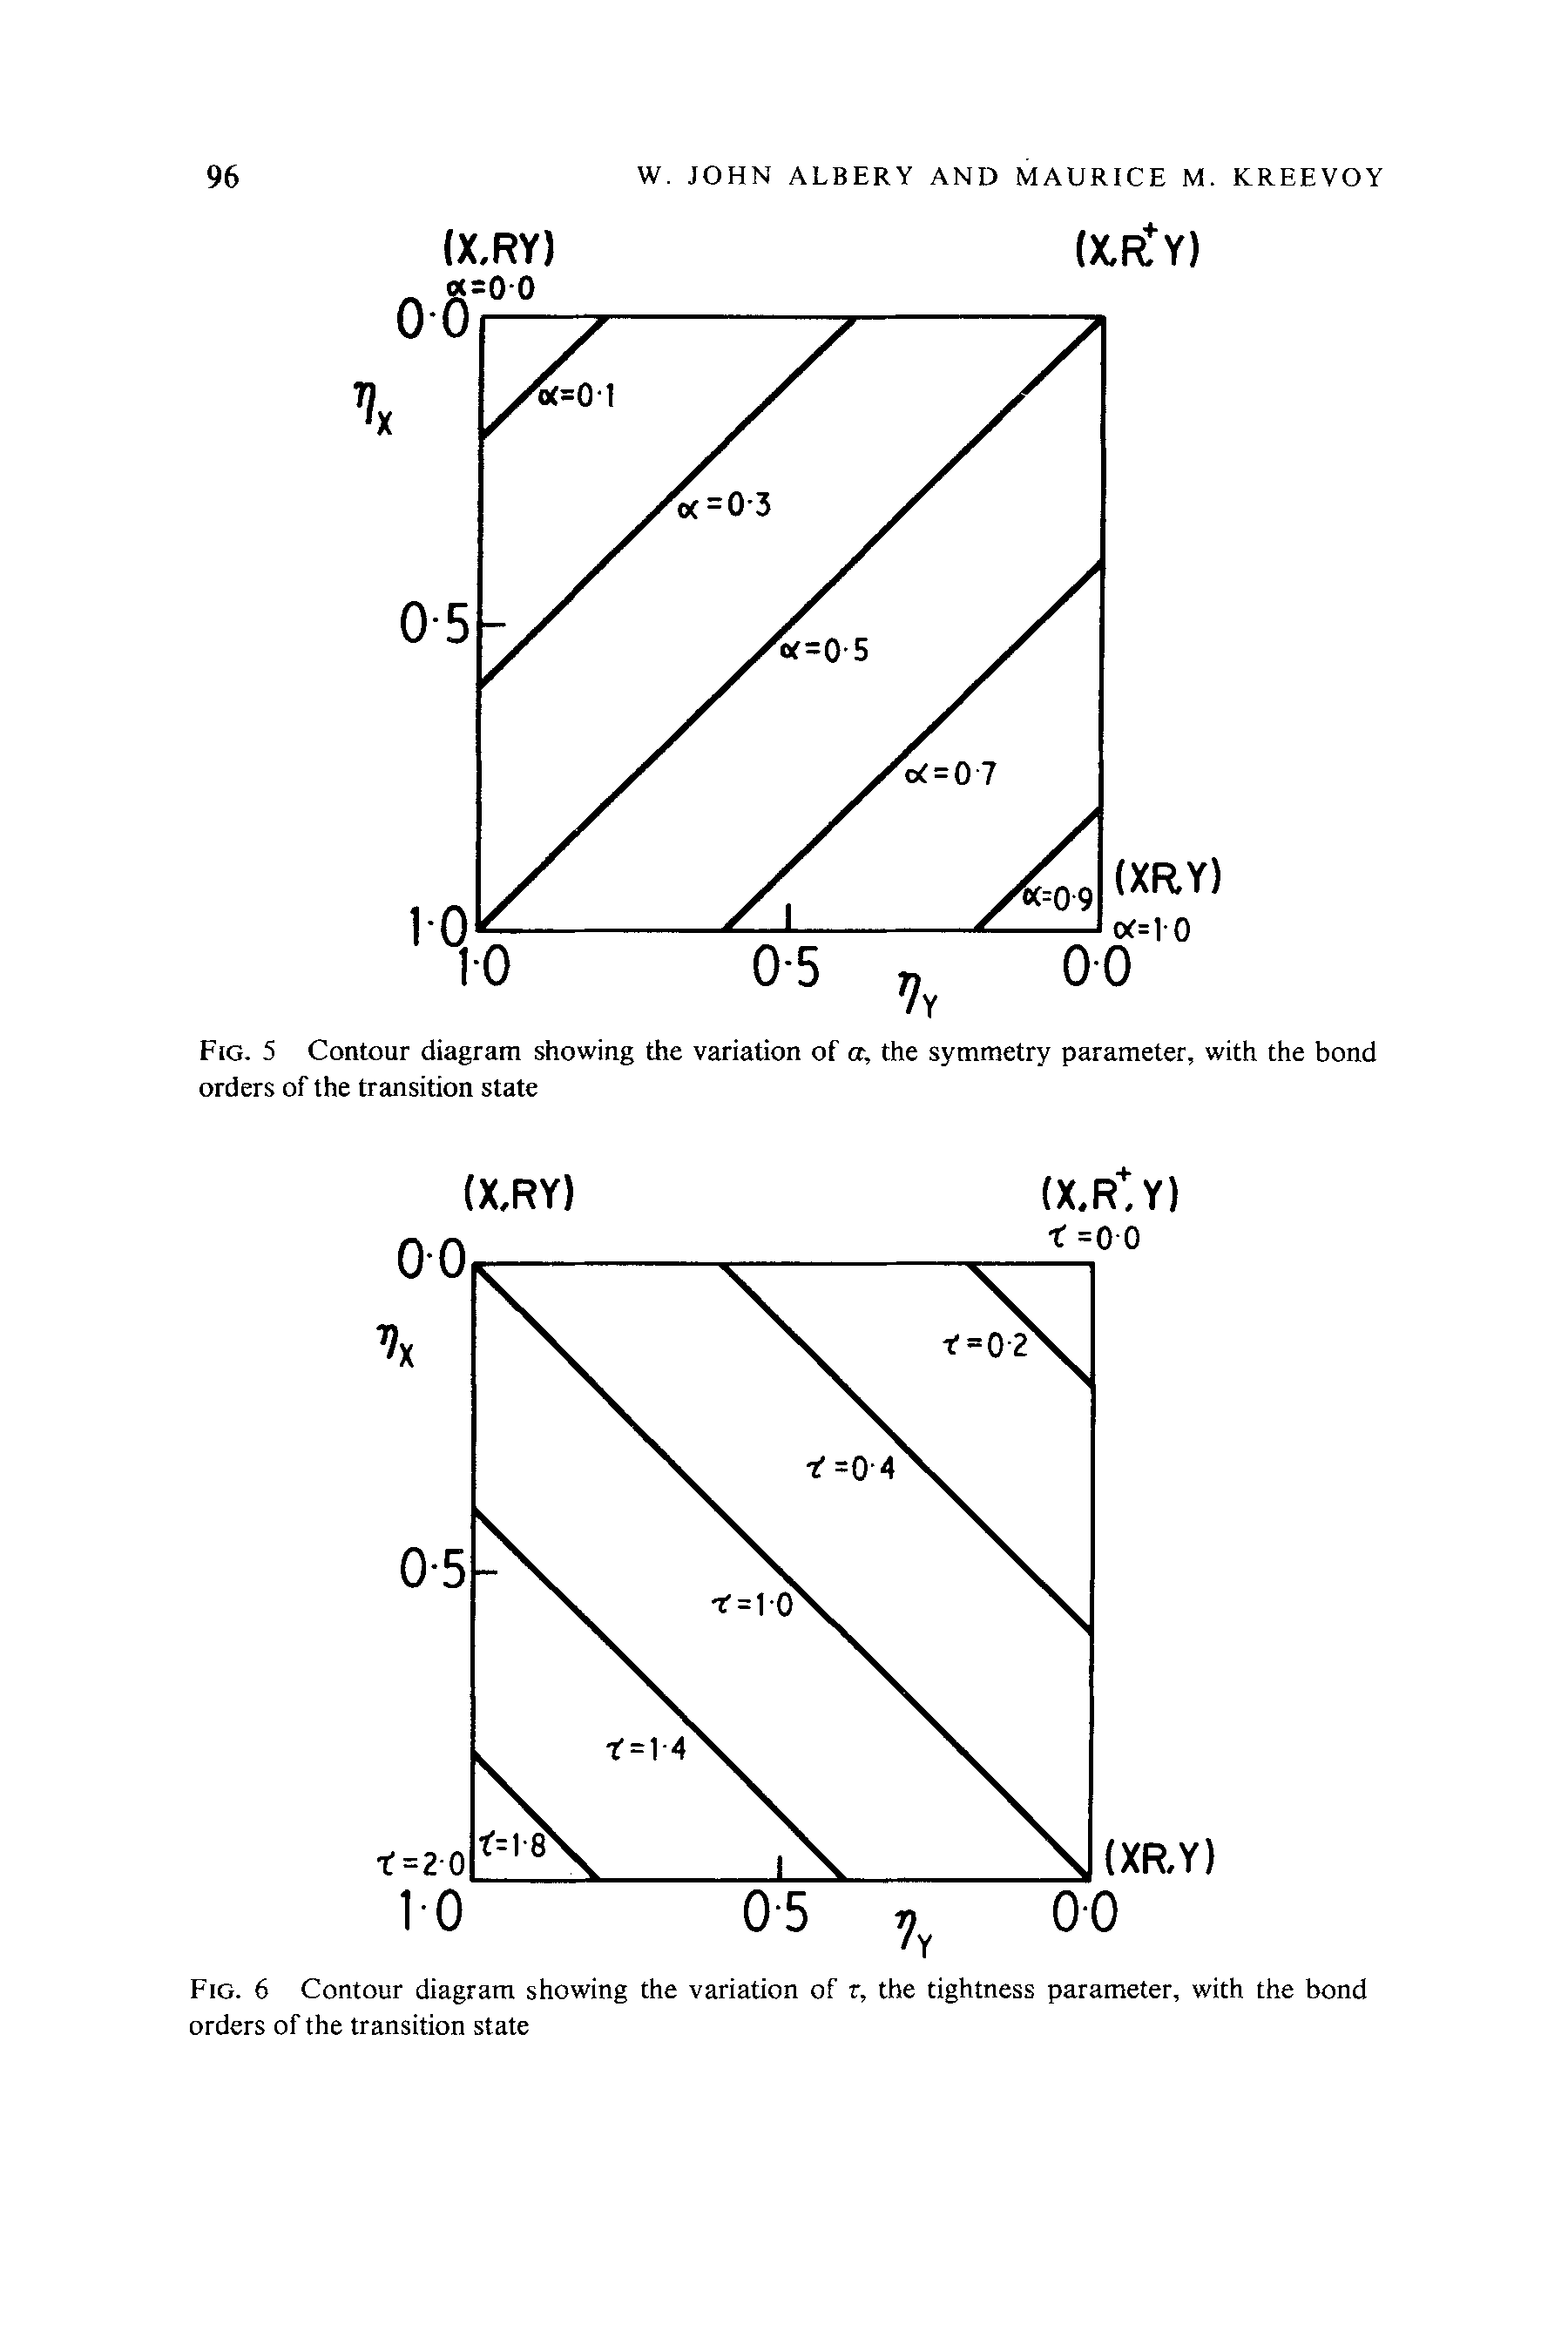 Fig. 5 Contour diagram showing the variation of or, the symmetry parameter, with the bond orders of the transition state...